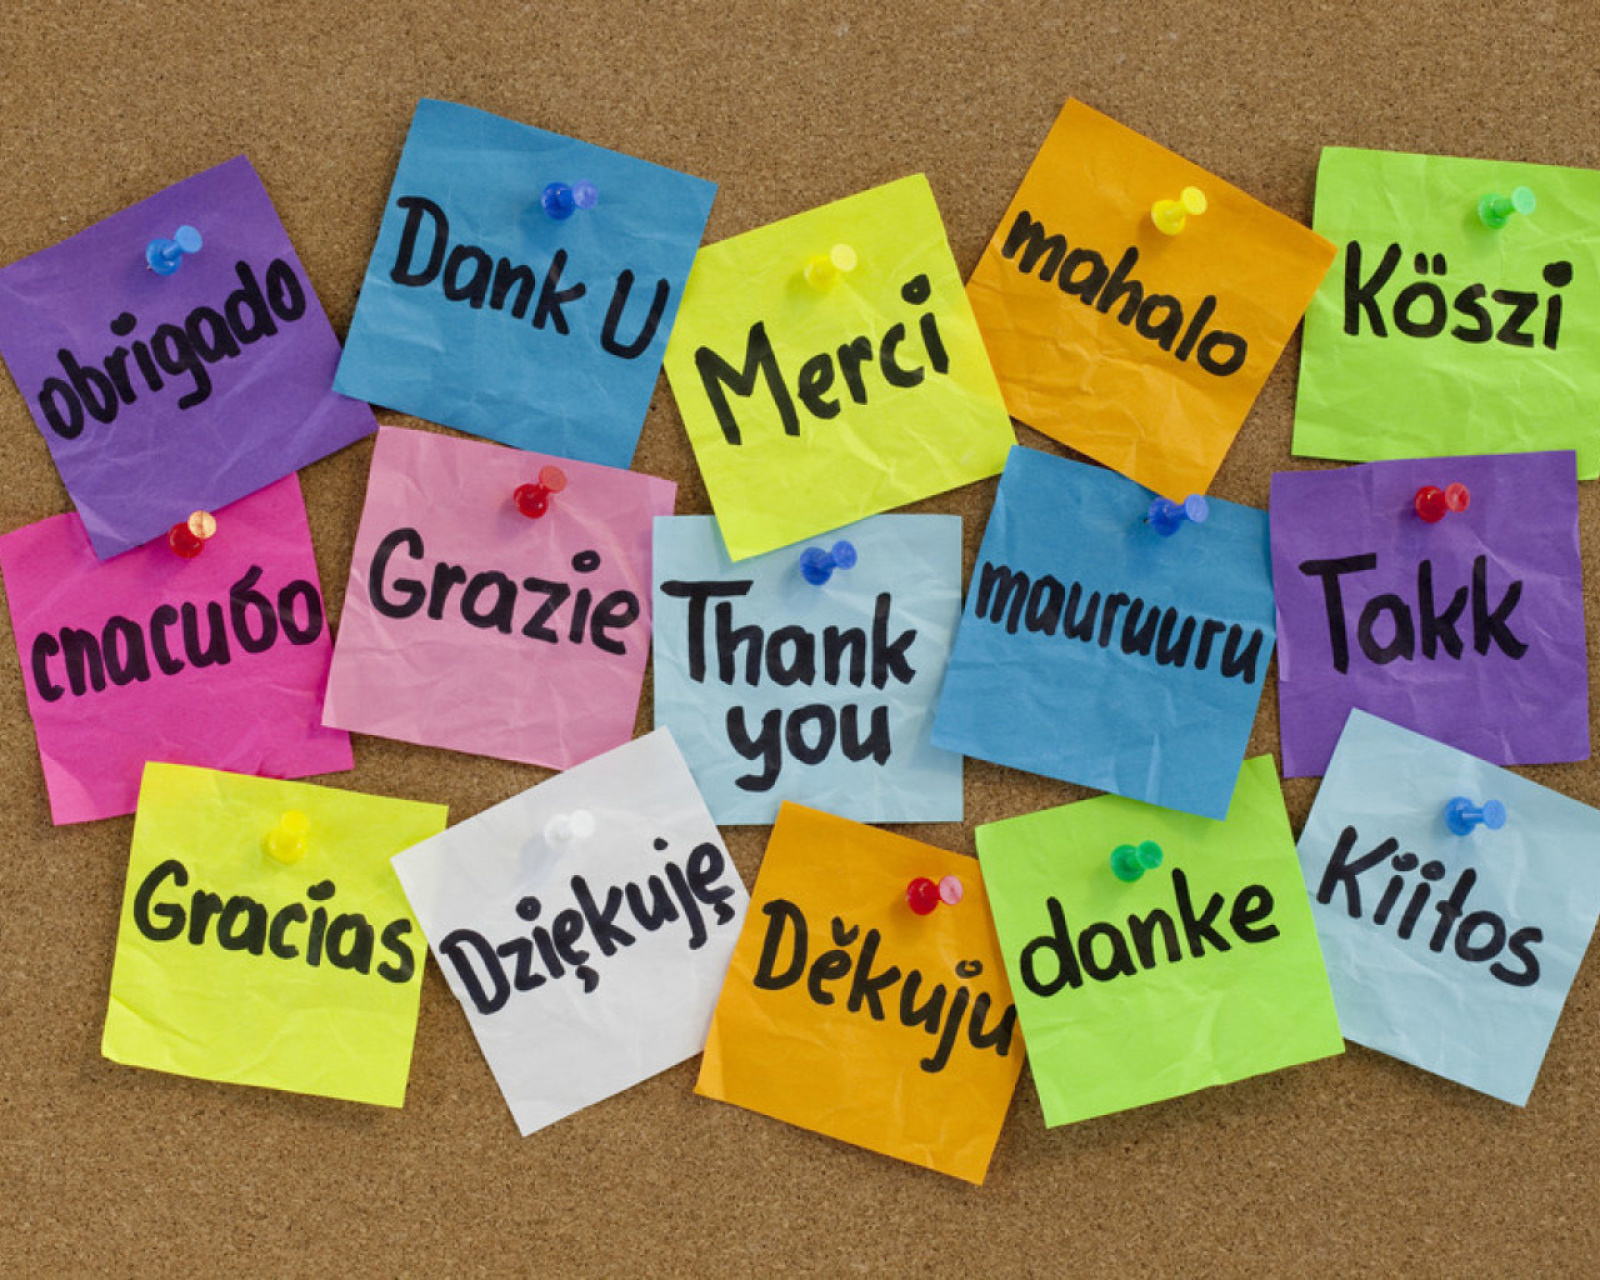 How To Say Thank You in Different Languages wallpaper 1600x1280